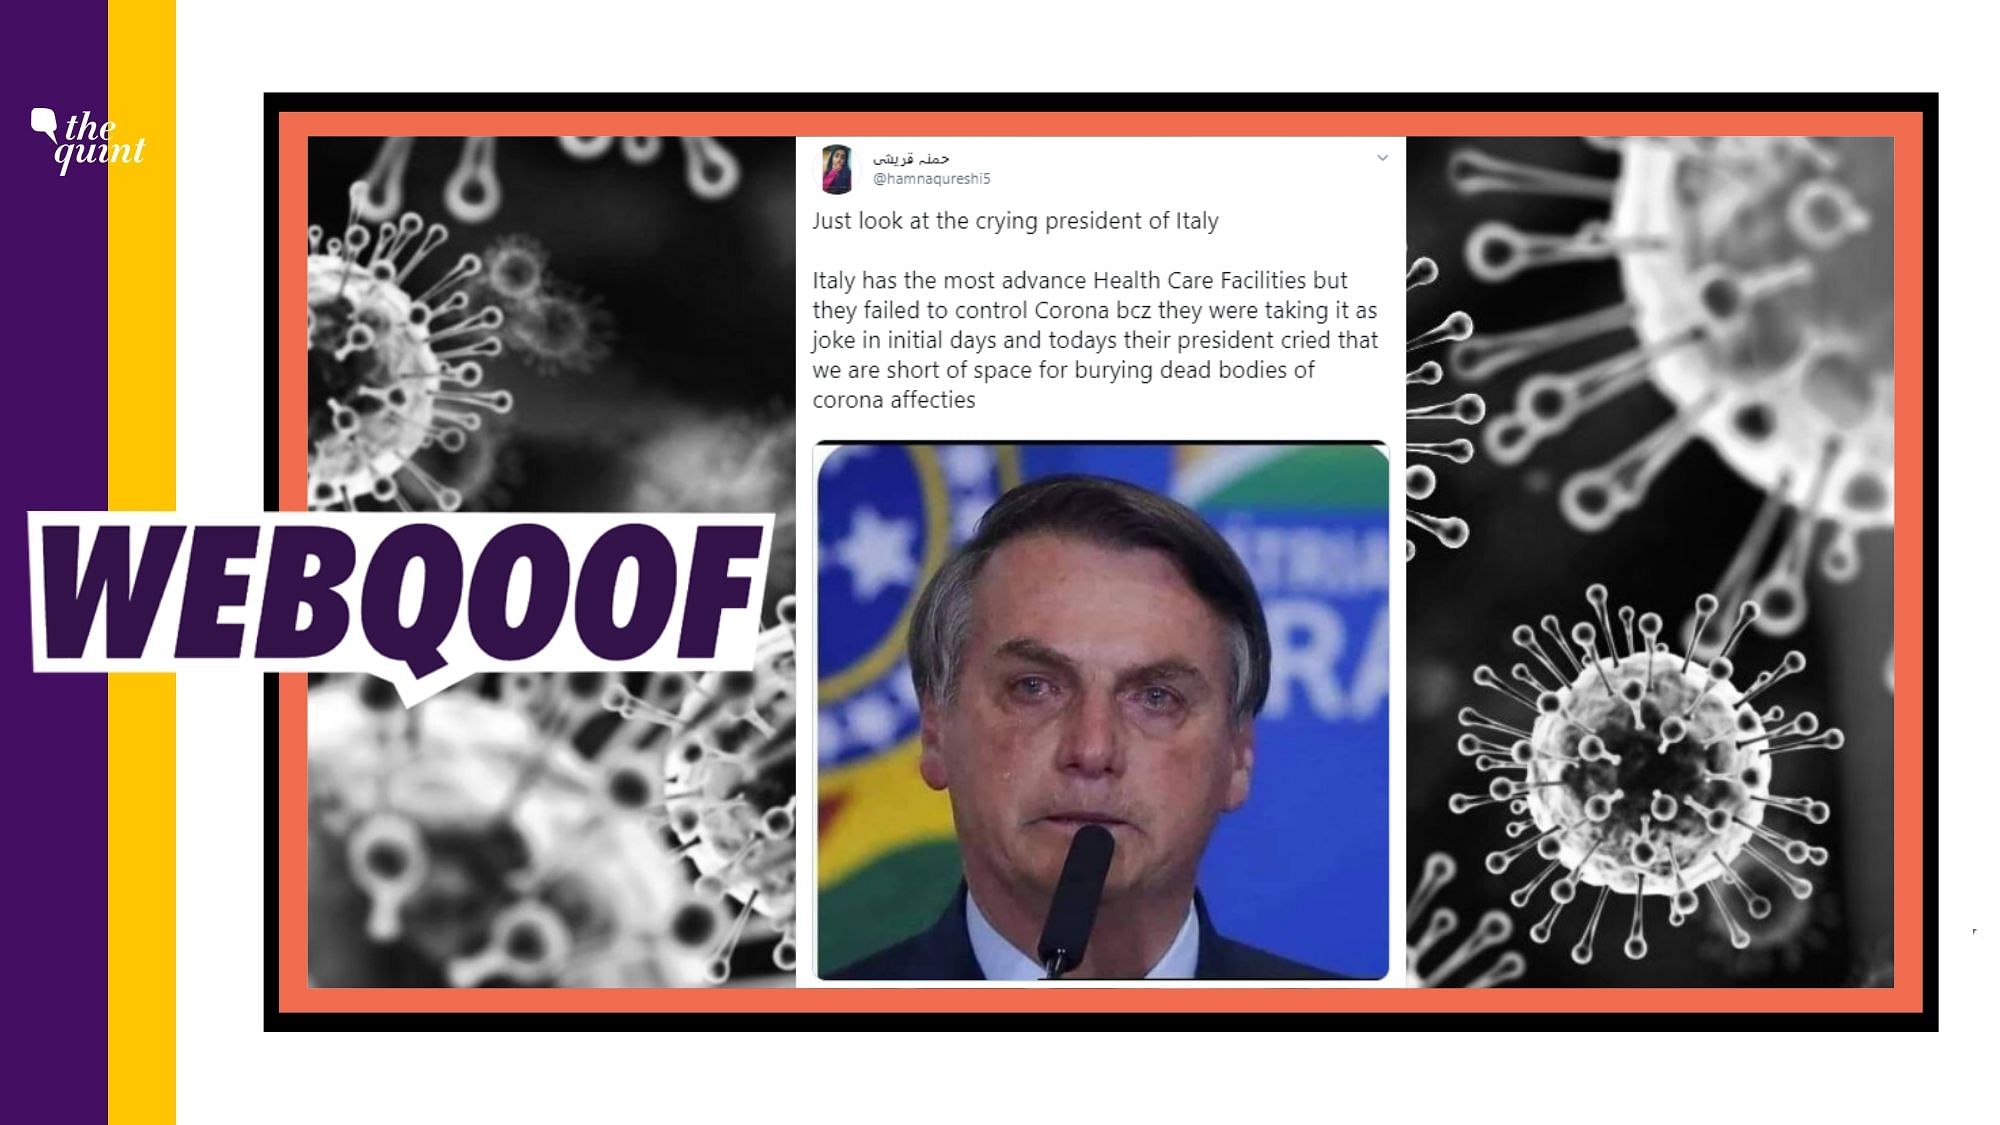 A viral image of Jair Bolsonaro is being circulated on the internet with a claim that its shows the President of Italy crying of coronavirus pandemic.